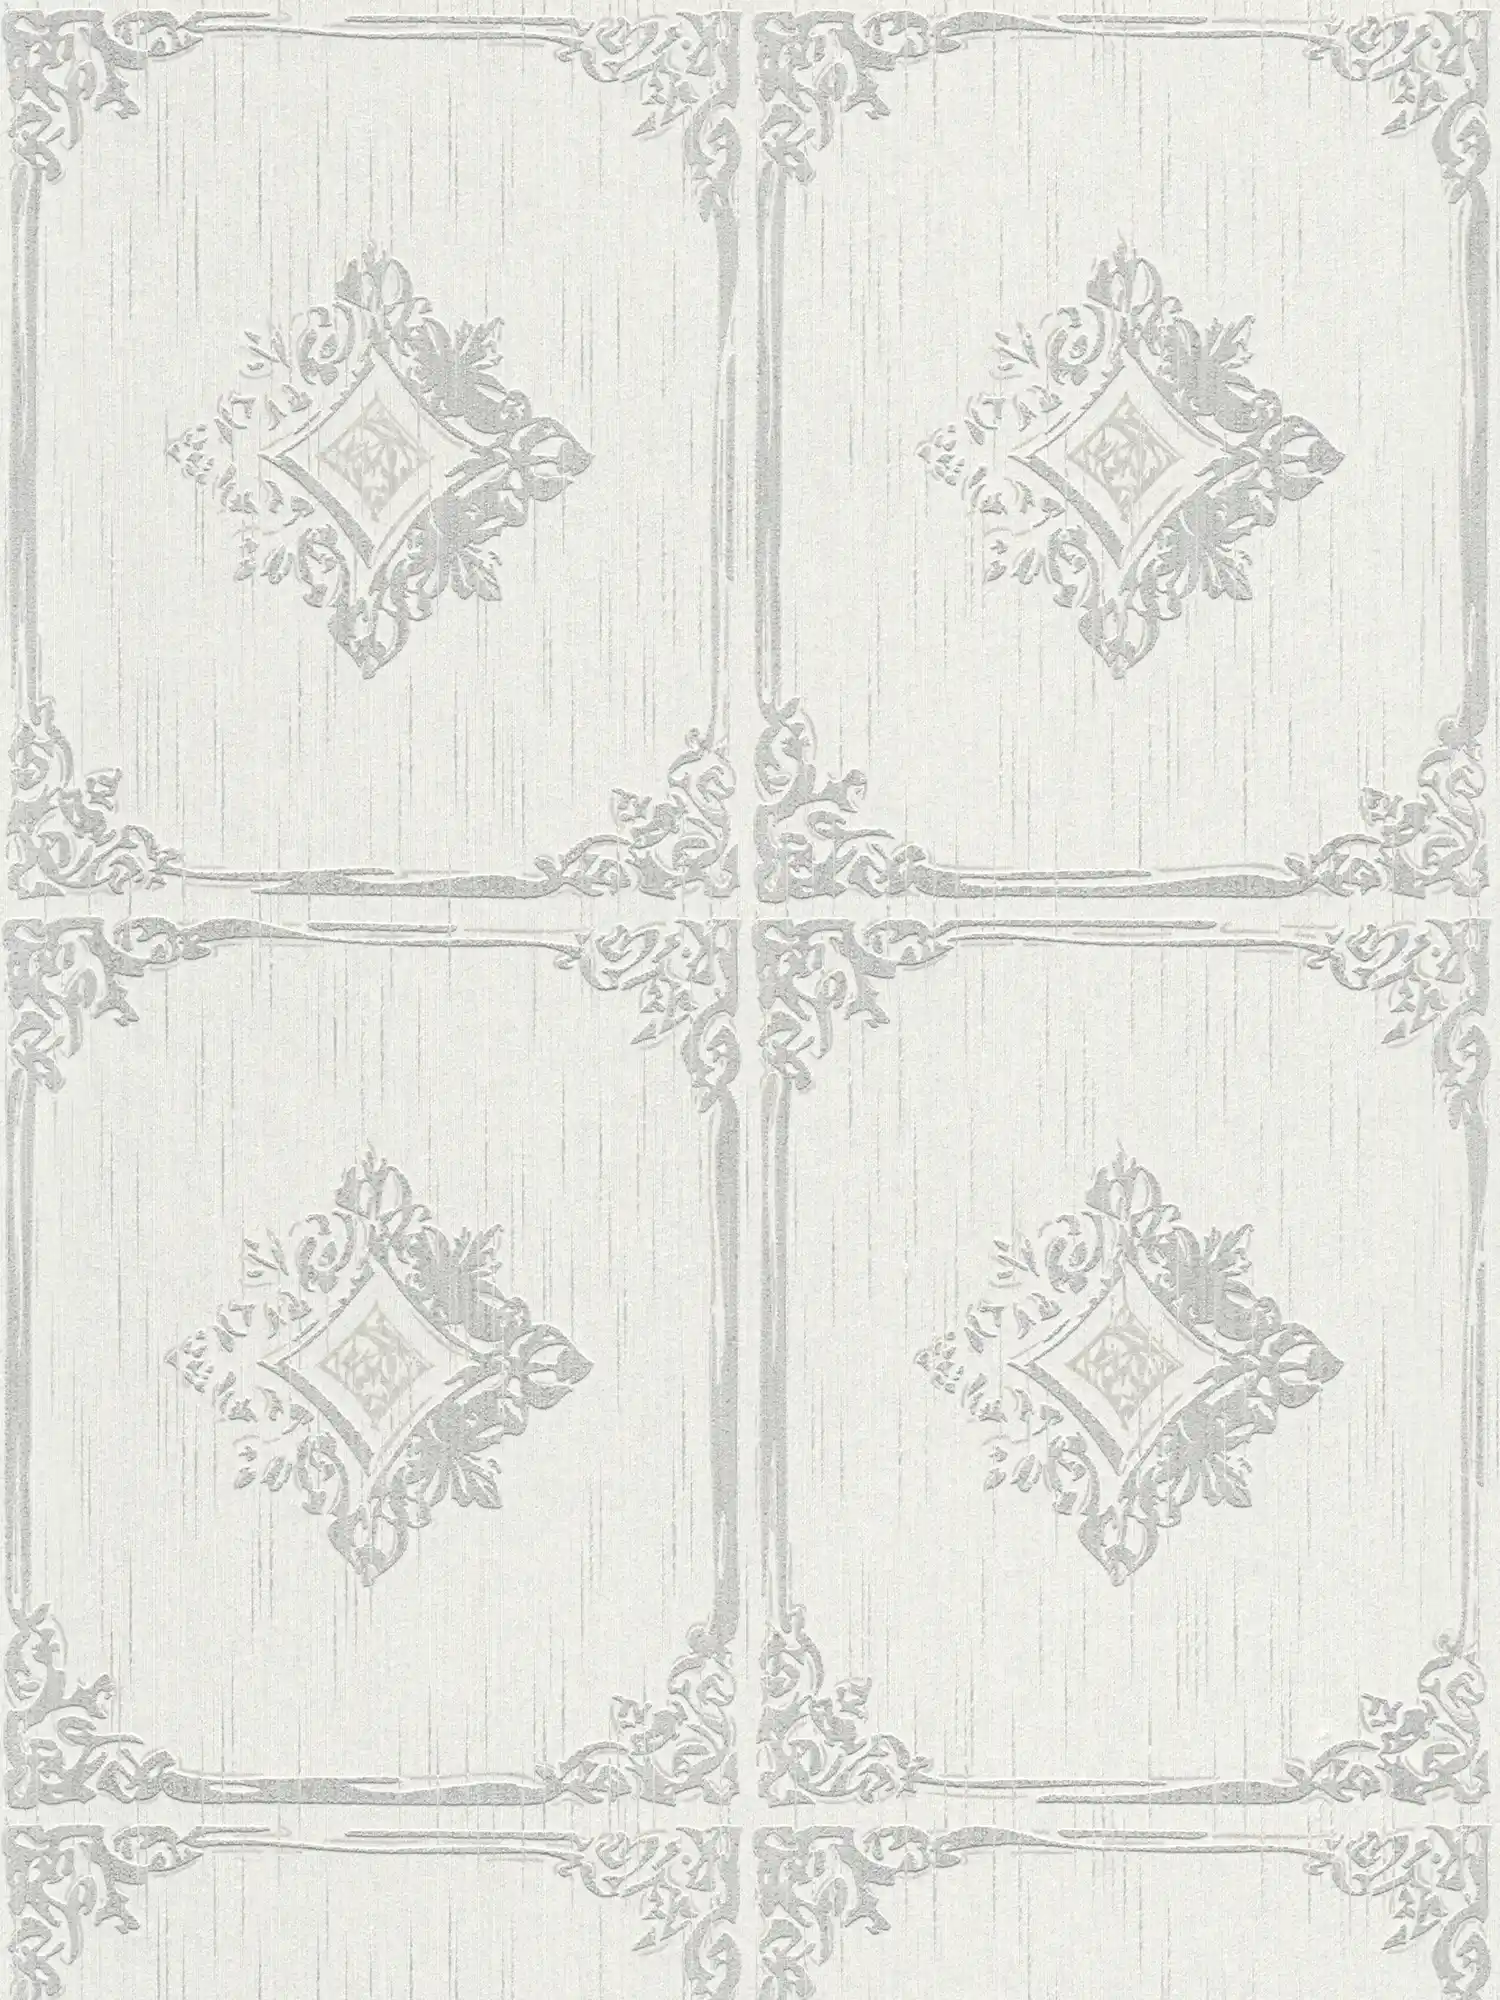 Wallpaper vintage stucco design with ornament coffers - grey, white
